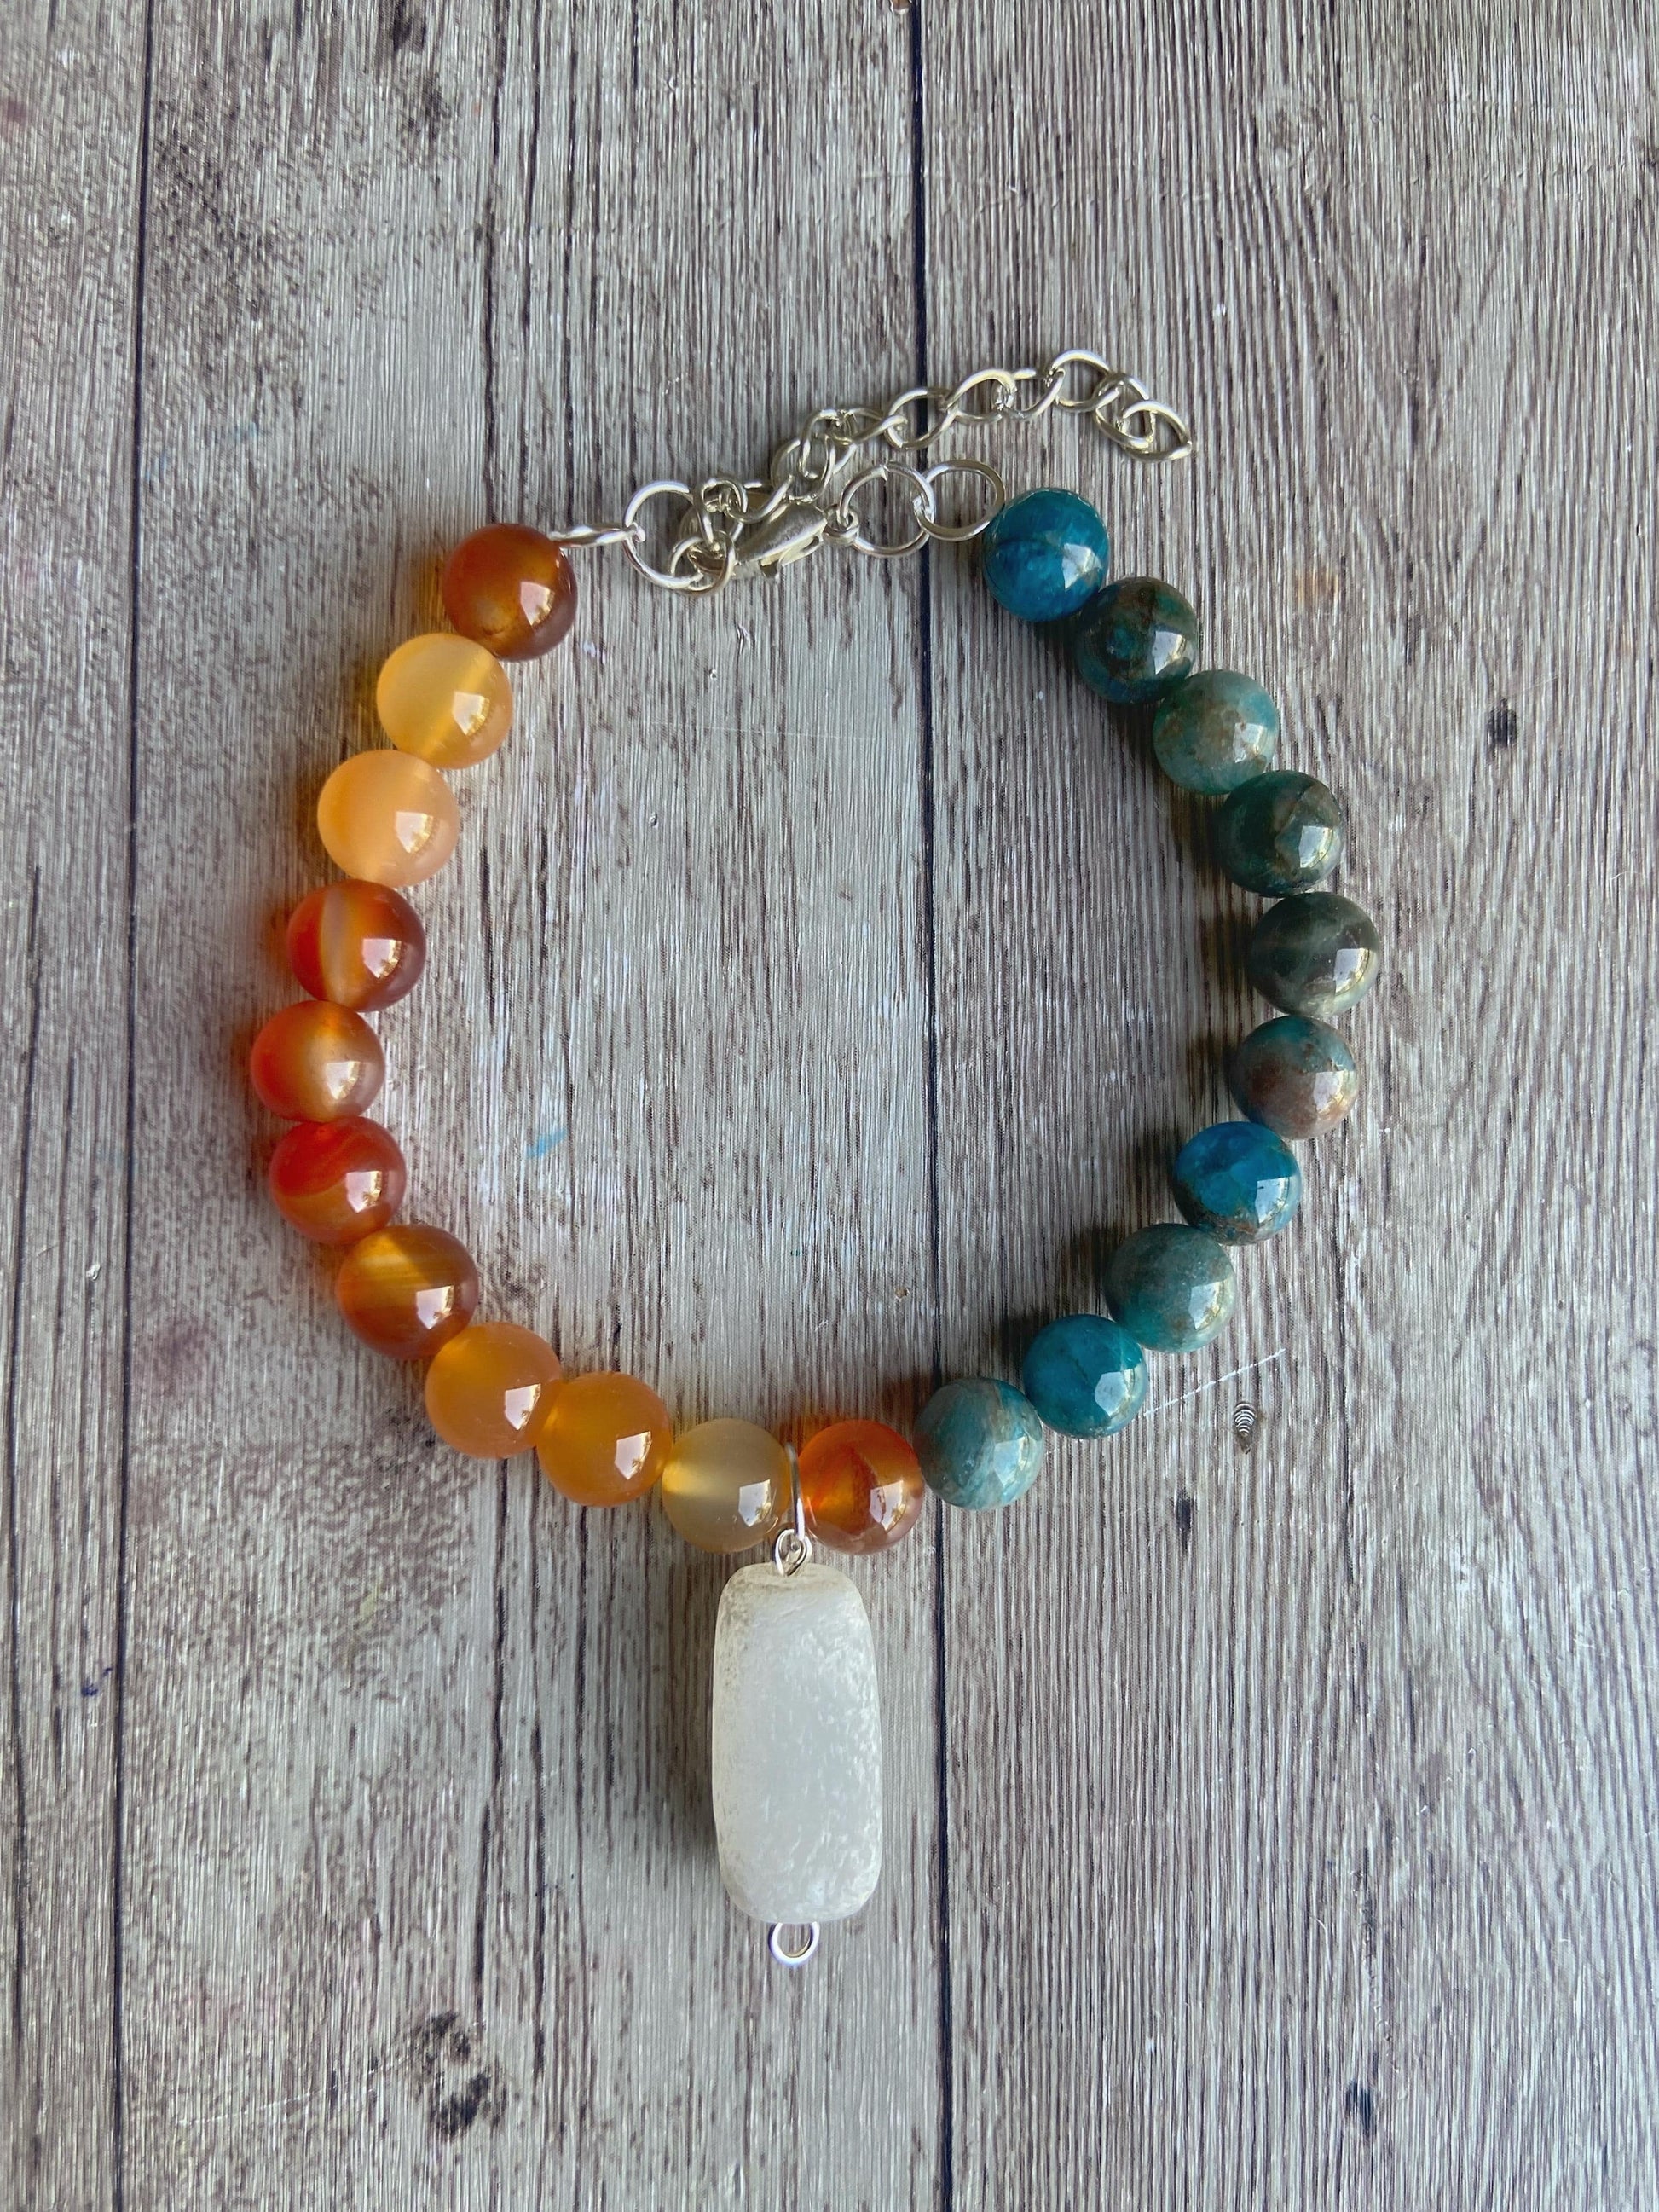 Bracelet Associated With Motivation | Independence Focus & Creativity Crystal Stones